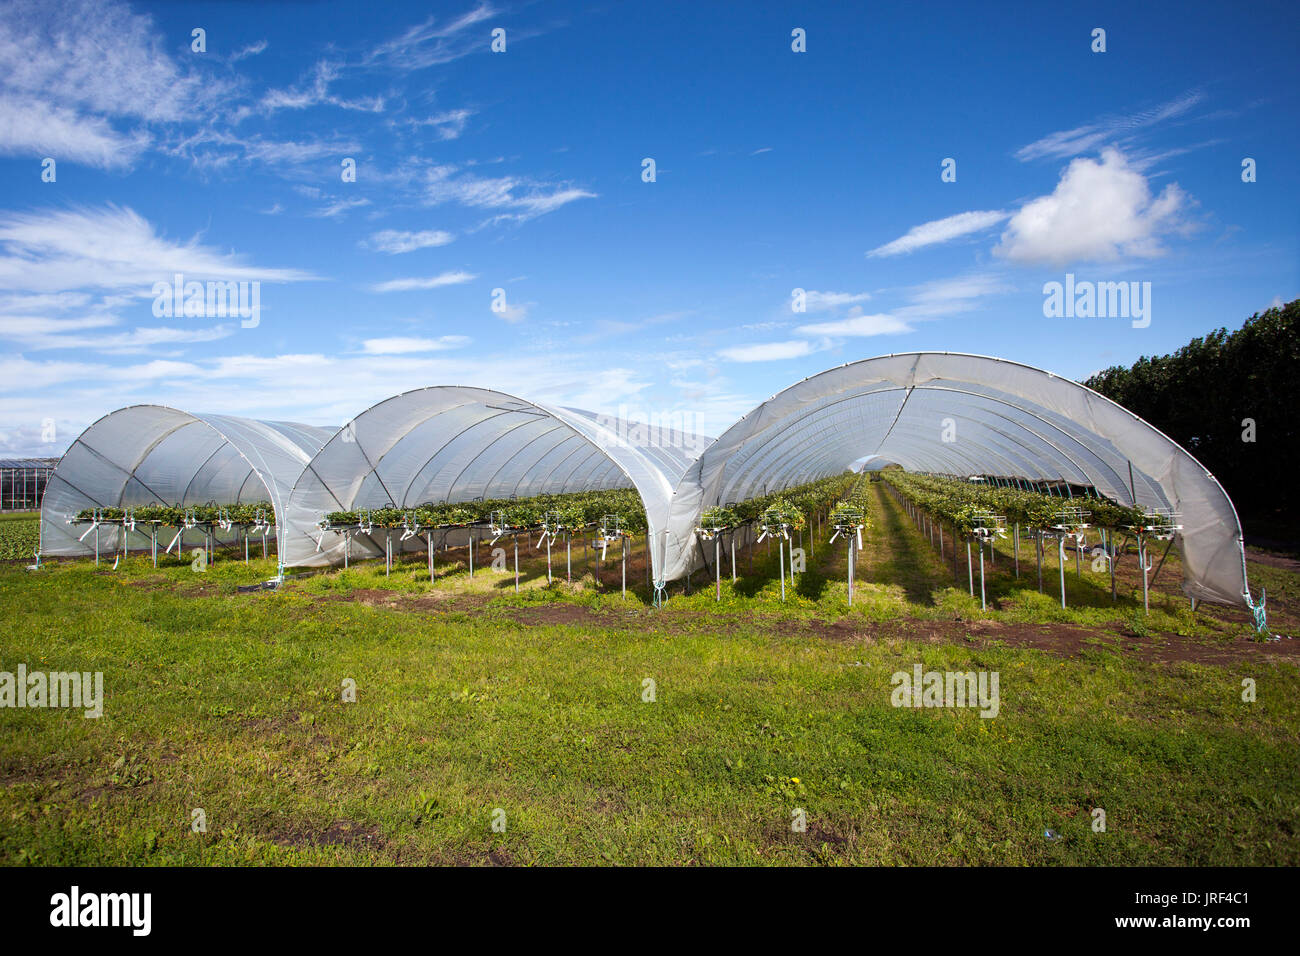 Strawberry Tunnel cloches in Tarleton, Lancashire, UK Weather. 5th August, 2017. Bright sunny day for strawberry farmers as they take advantage of the drying soils to plant and attend to their commercial crops in the field. The area, known as the Salad Bowl of Lancashire produces high quality fruit & vegetables for the supermarkets of England and is a large employer of EU migrant workers. Stock Photo